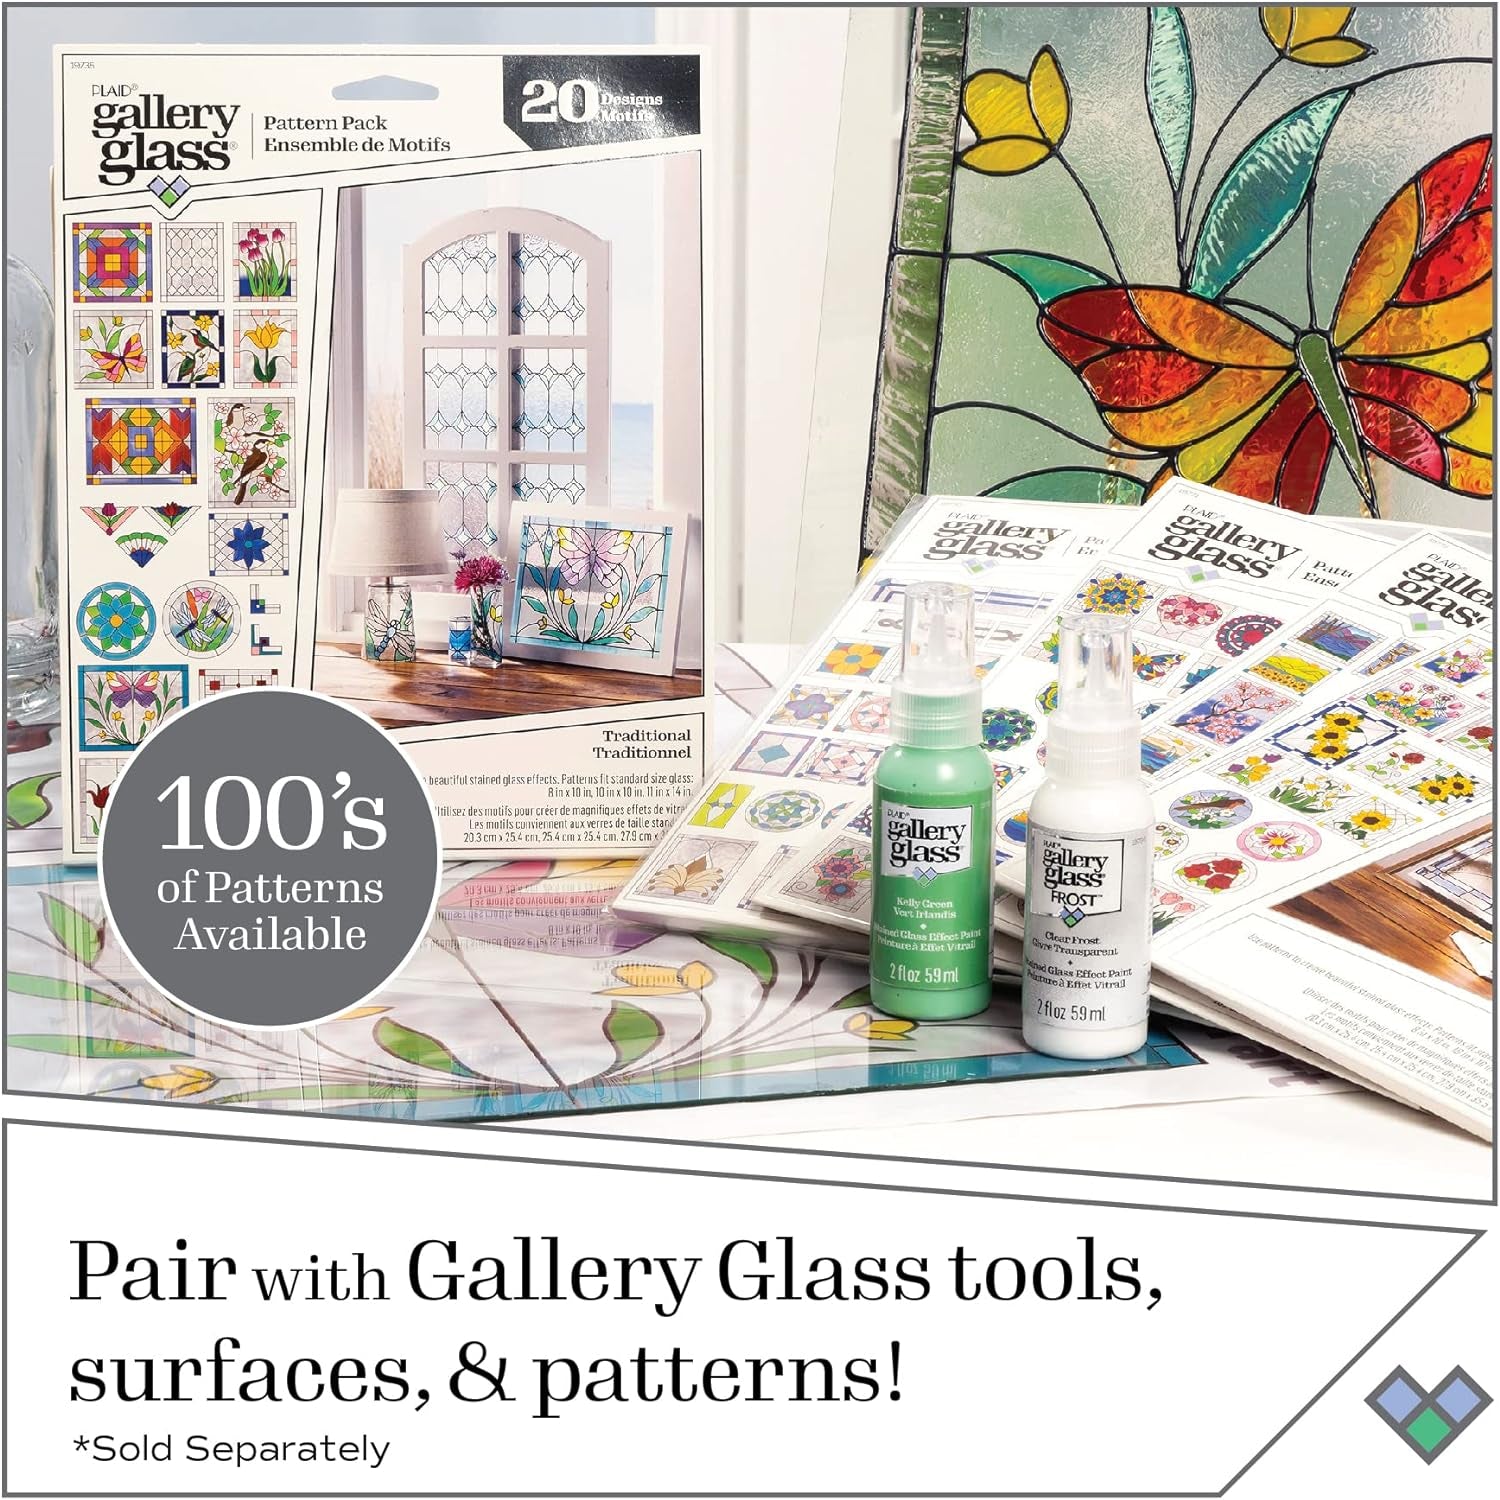 Jewel Tones PROMOGGJL22 Stained Kit, 8 Piece Glass Paint Set for DIY Arts and Crafts, Perfect for Beginners and Artists